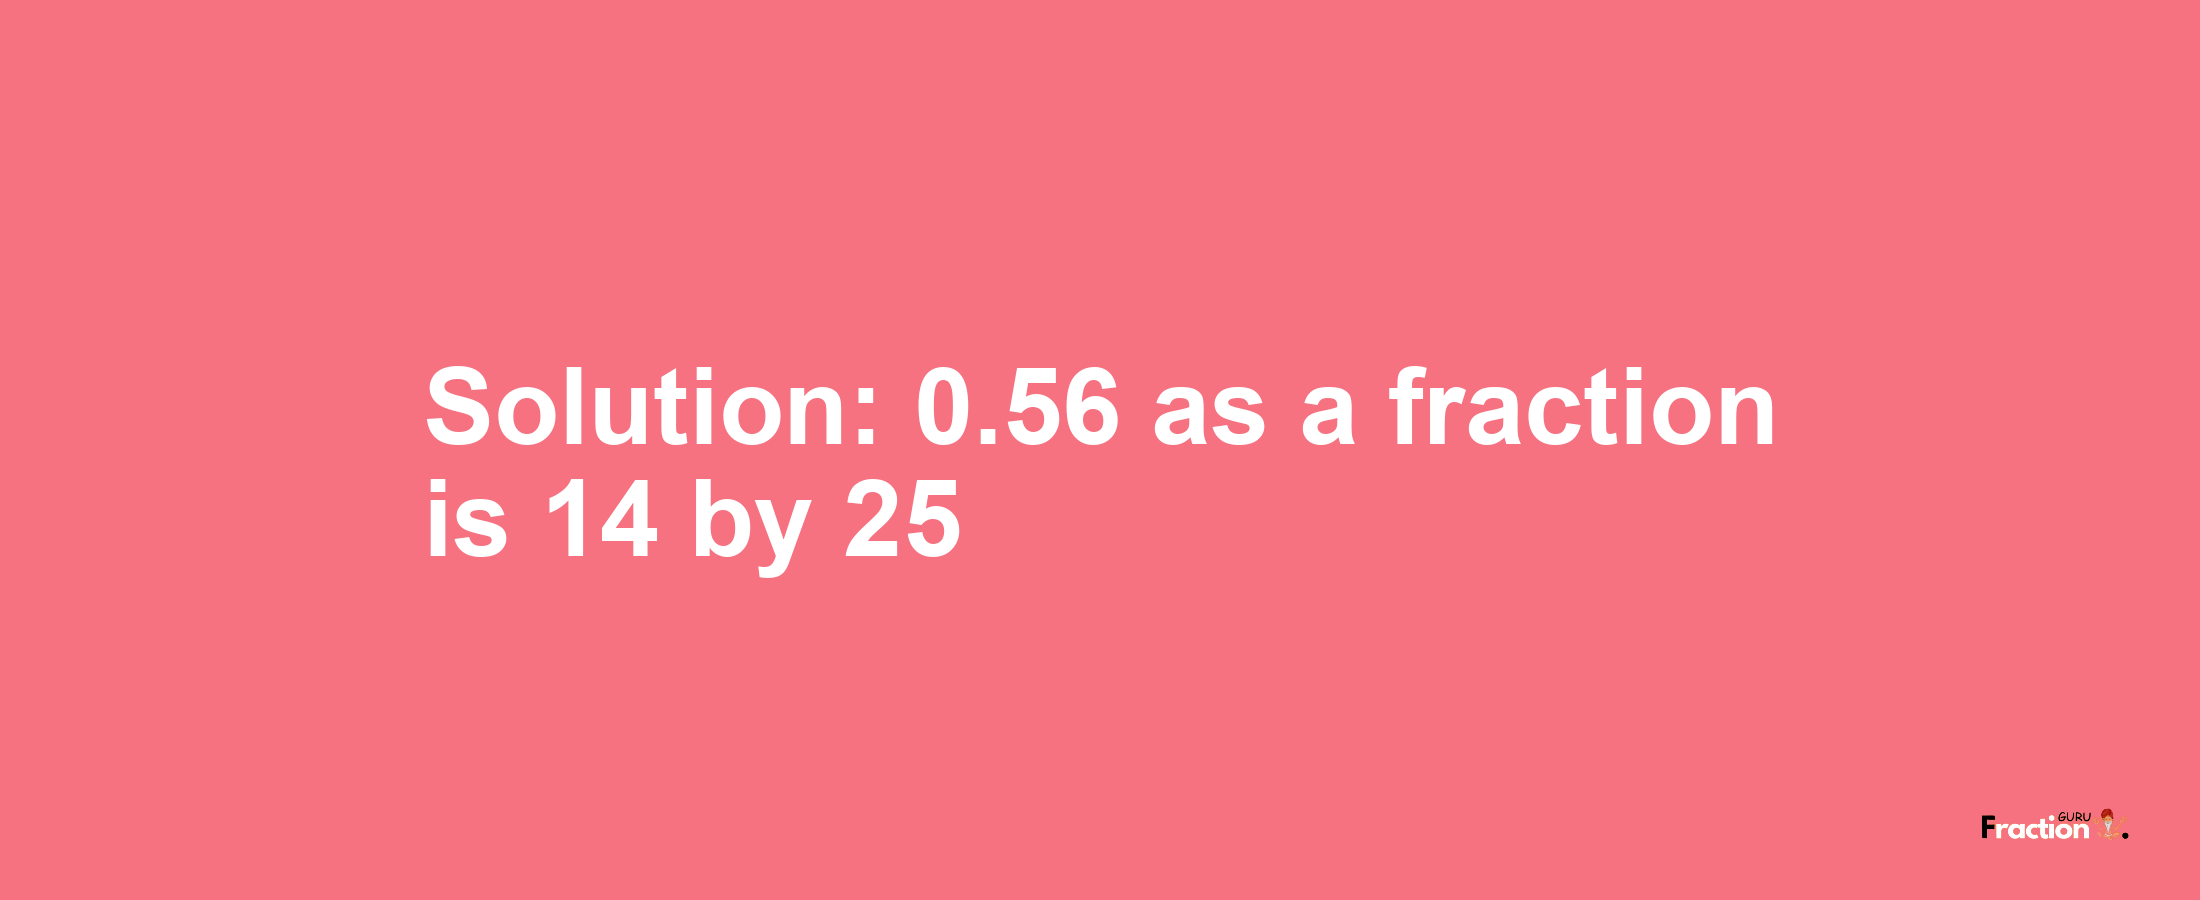 Solution:0.56 as a fraction is 14/25